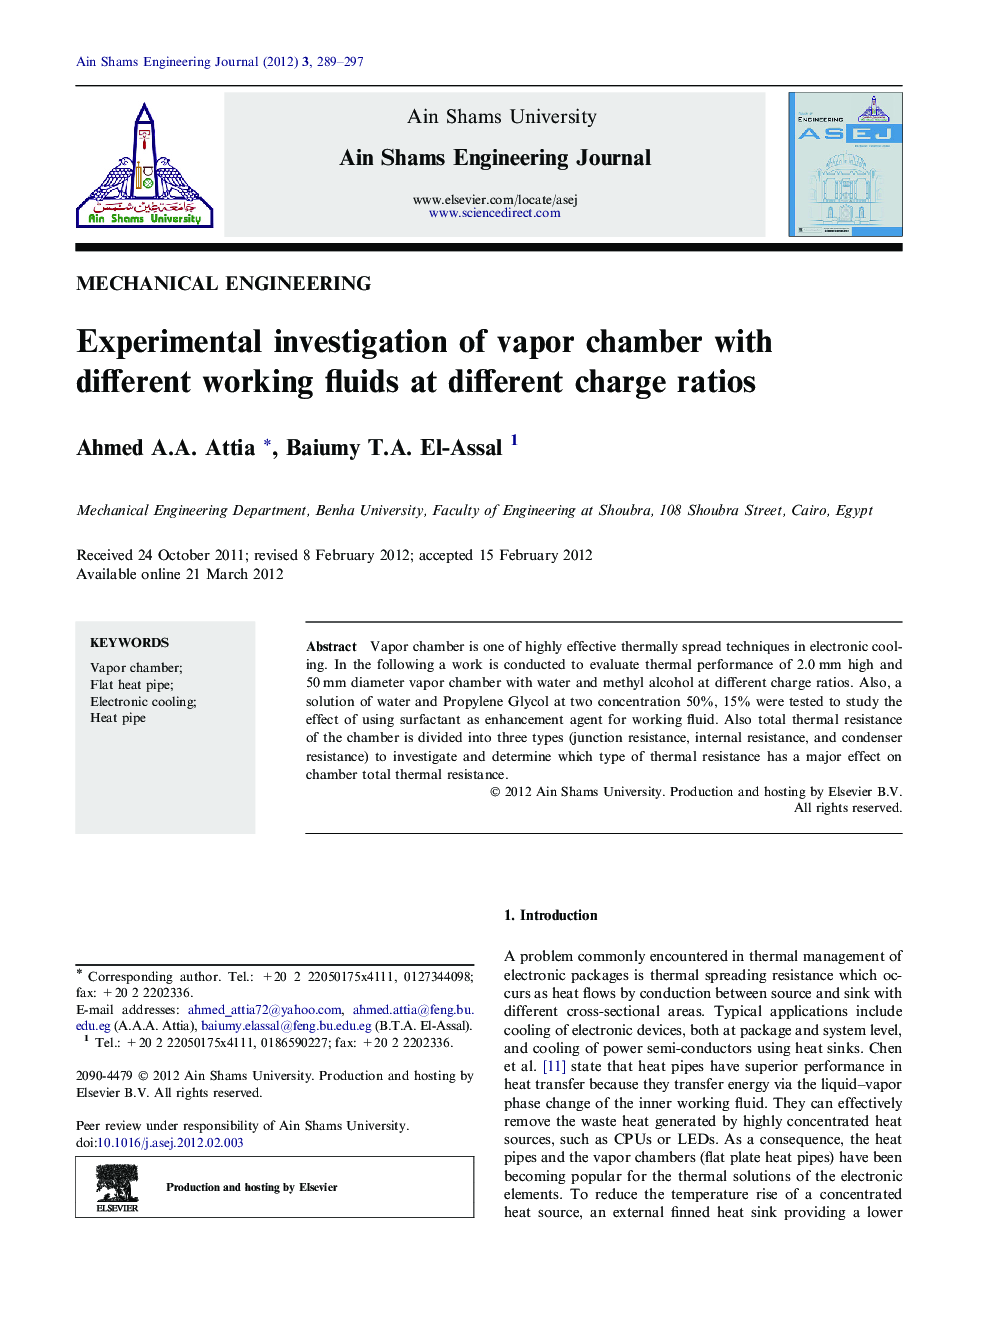 Experimental investigation of vapor chamber with different working fluids at different charge ratios